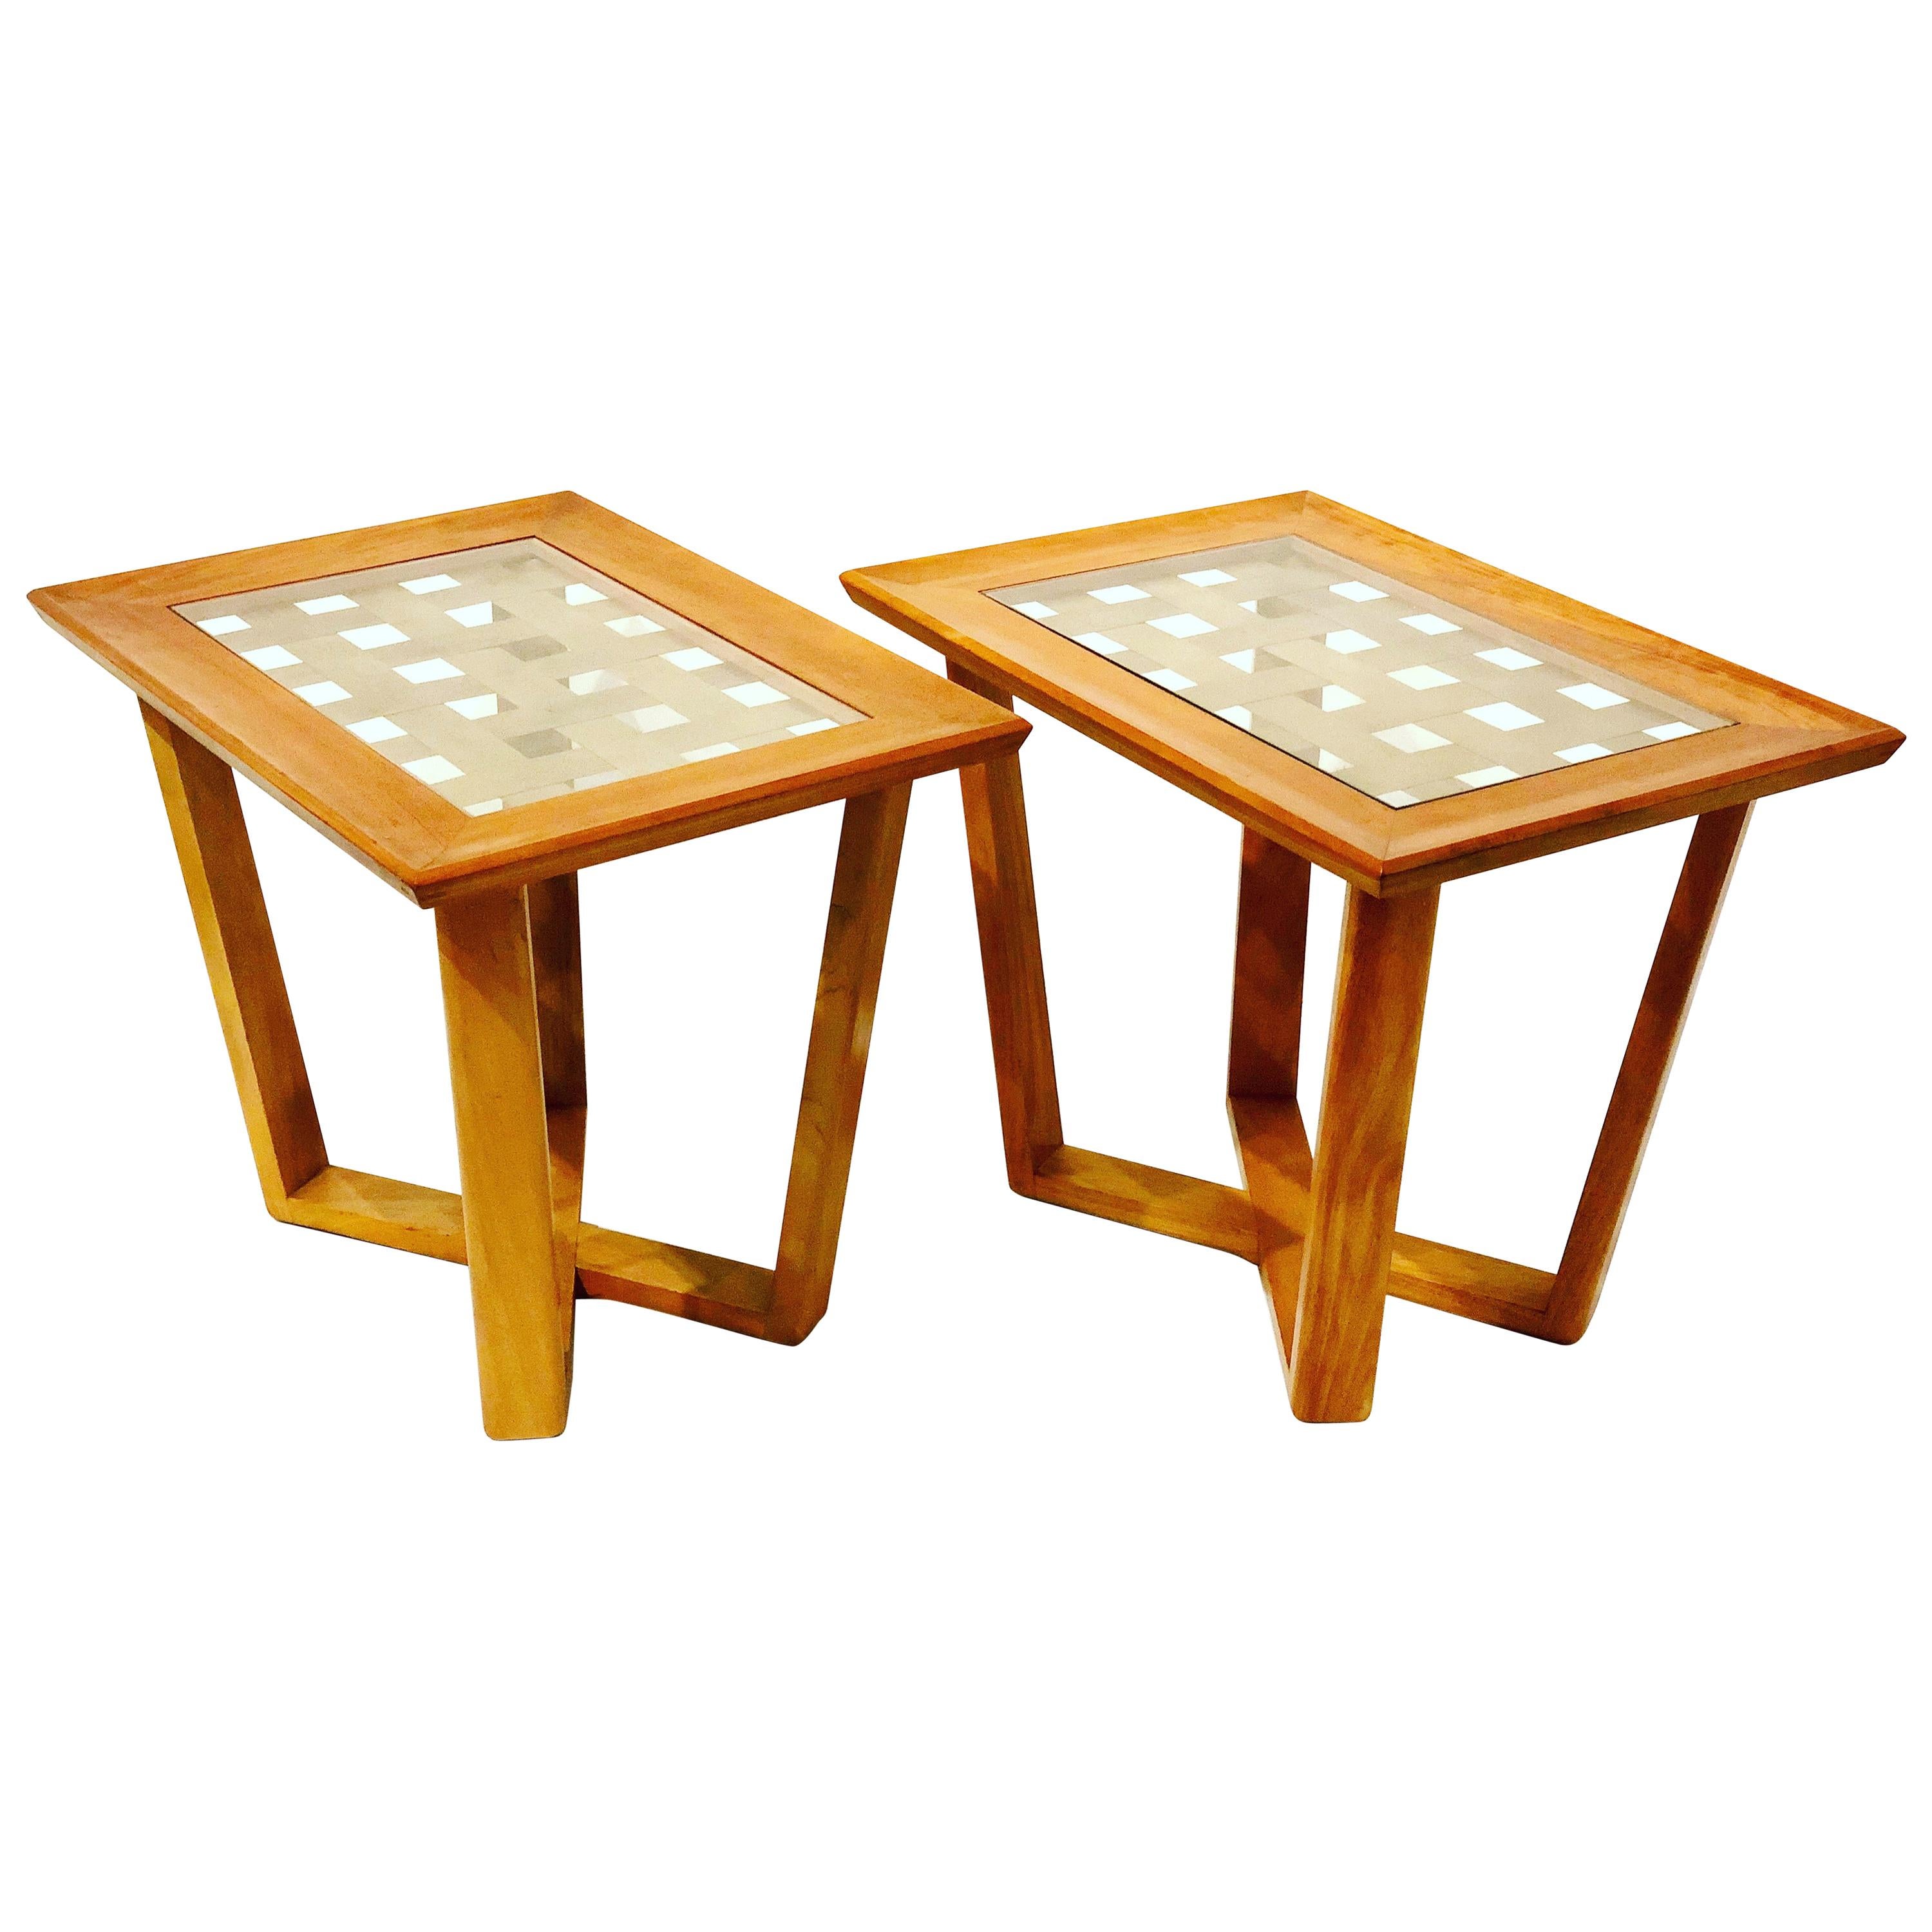 Pair of Rare Wood and Brass Mid-Century Modern End Tables